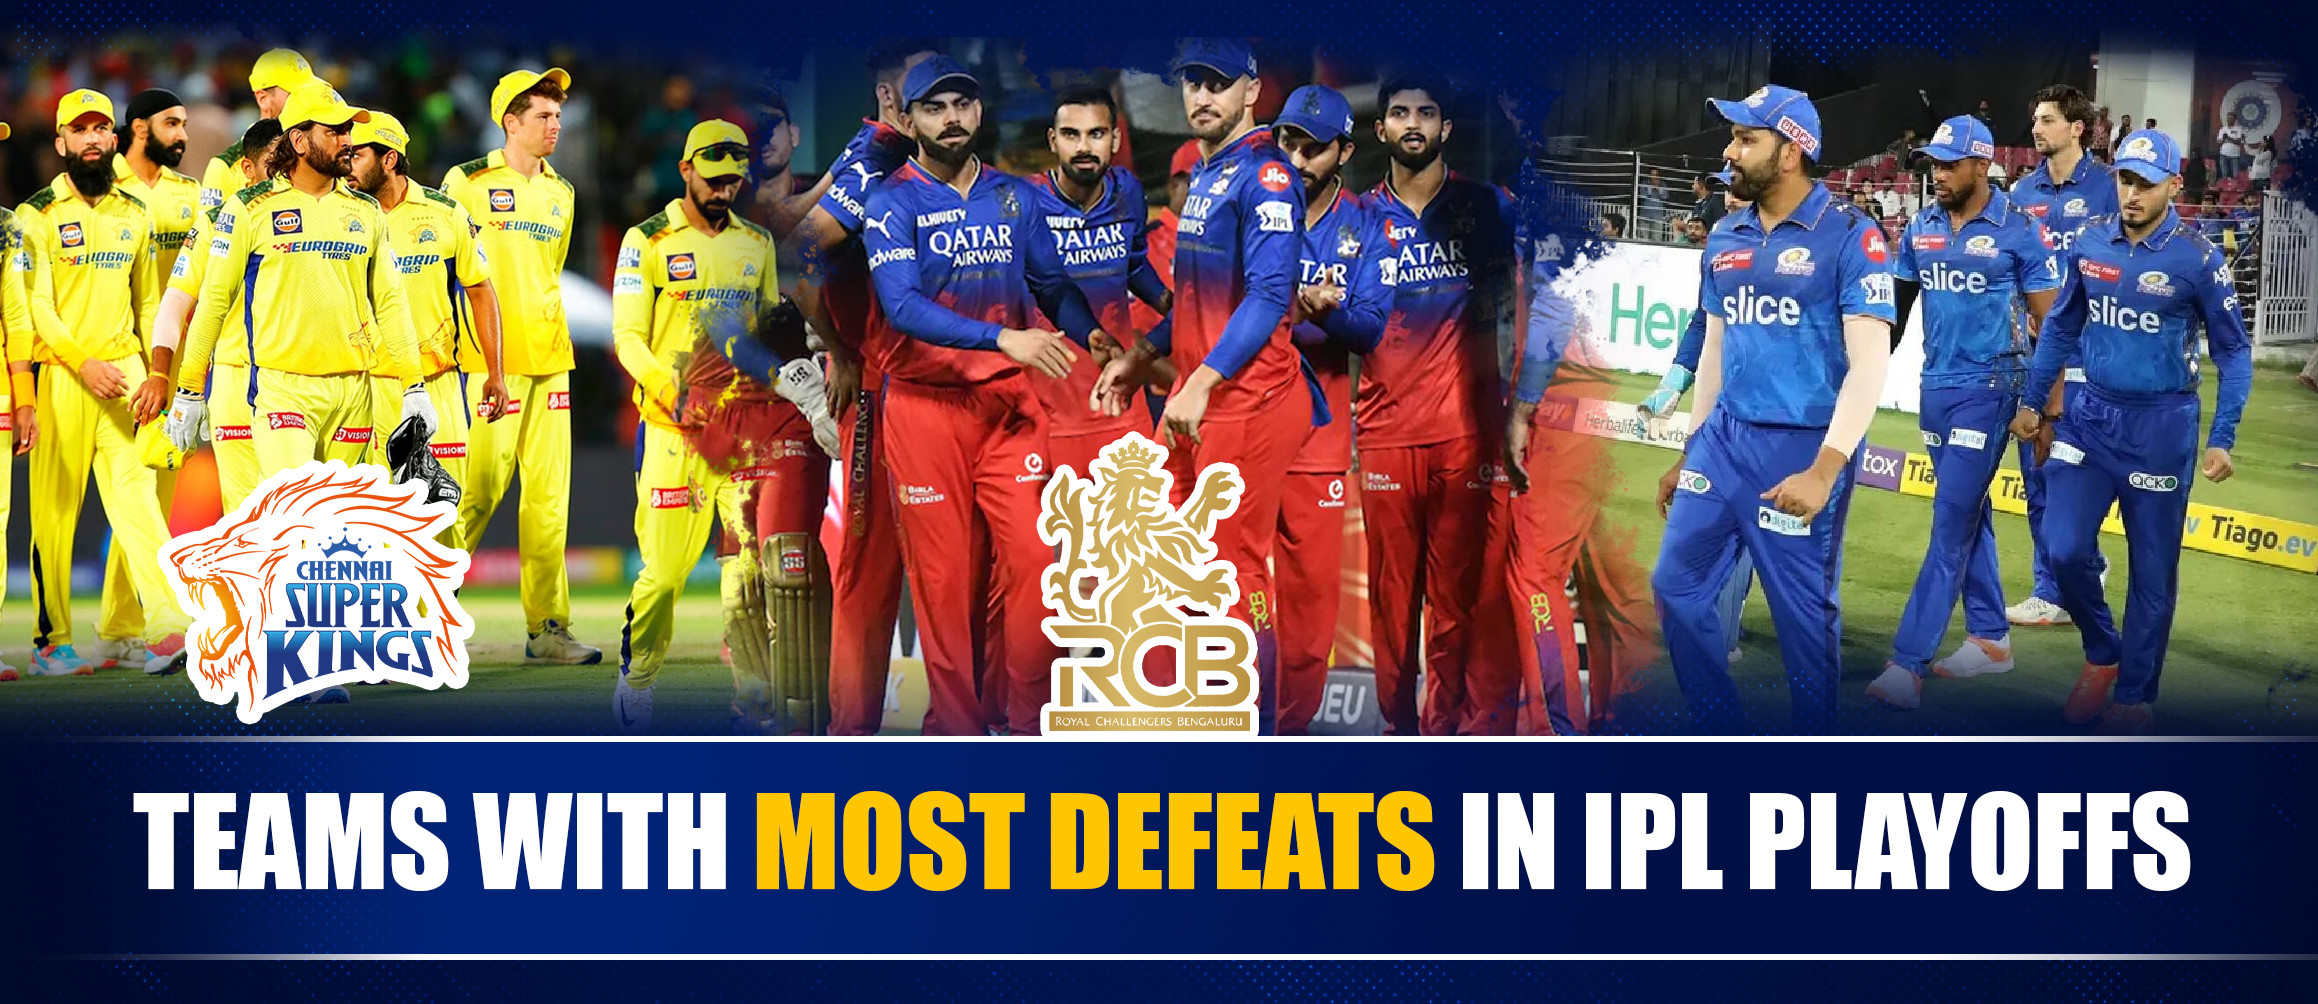 Teams With Most Defeats in IPL Playoffs